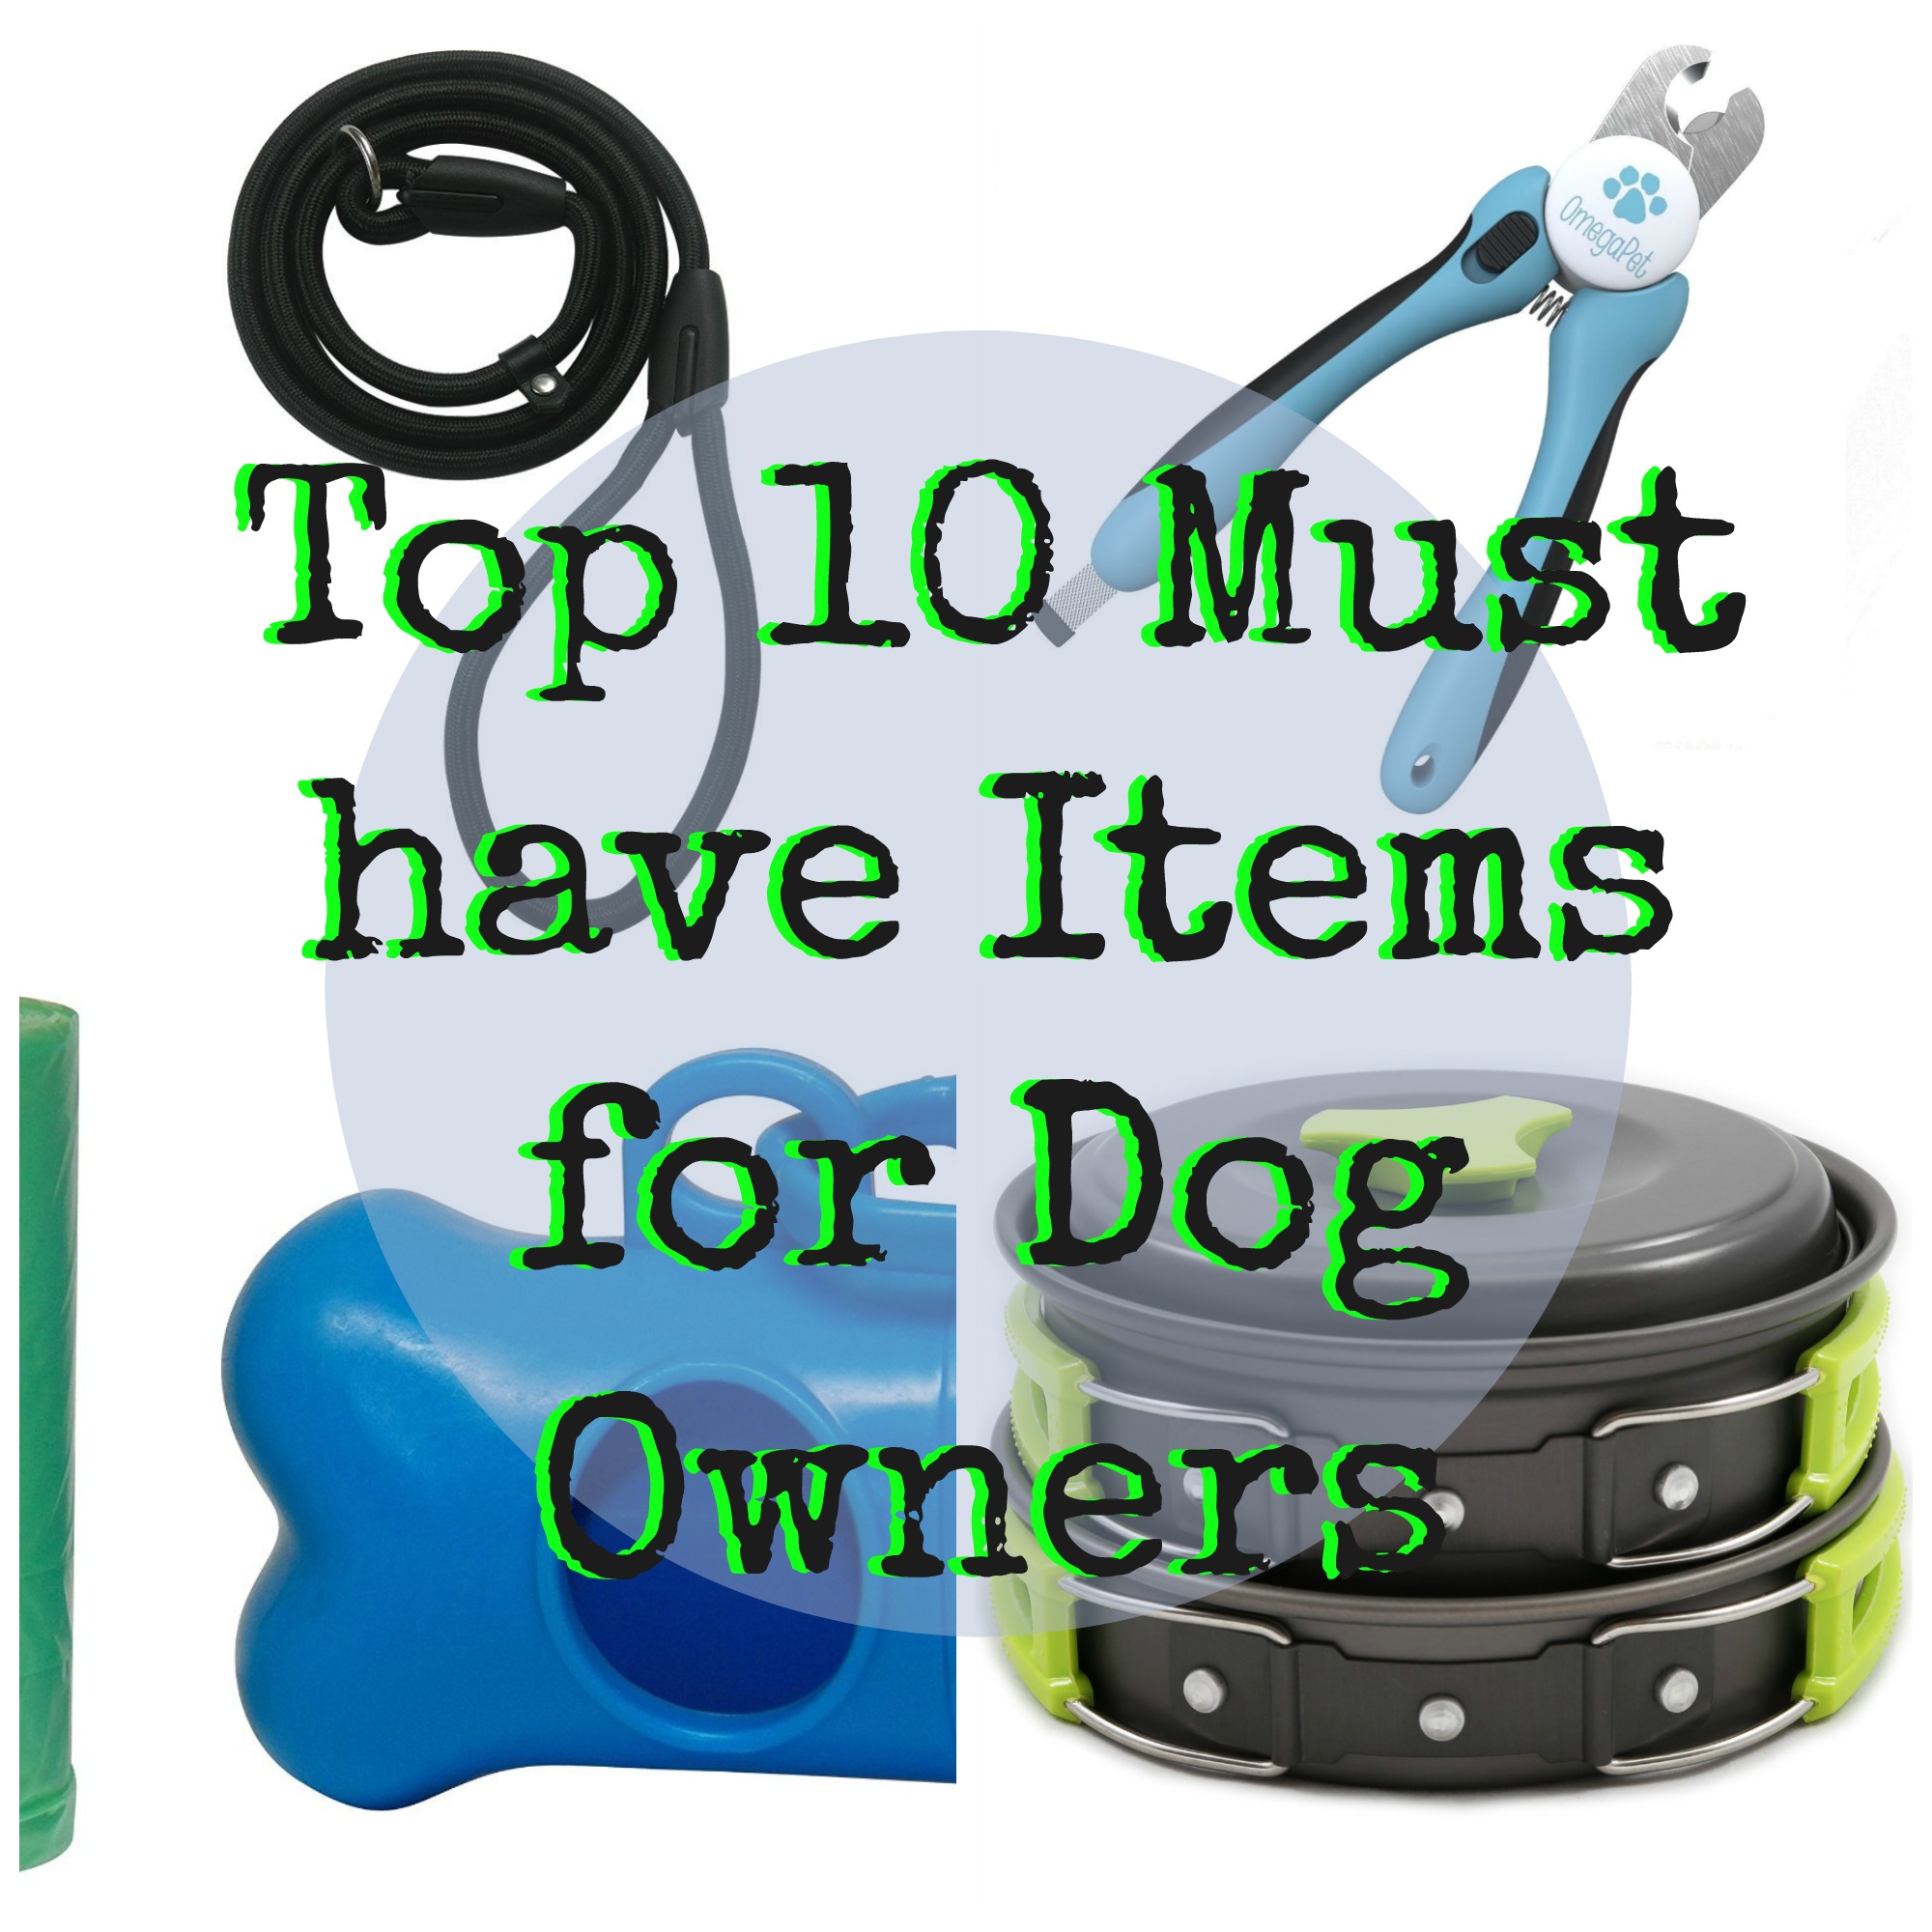 Top 10 Must have Items for Dog Owners